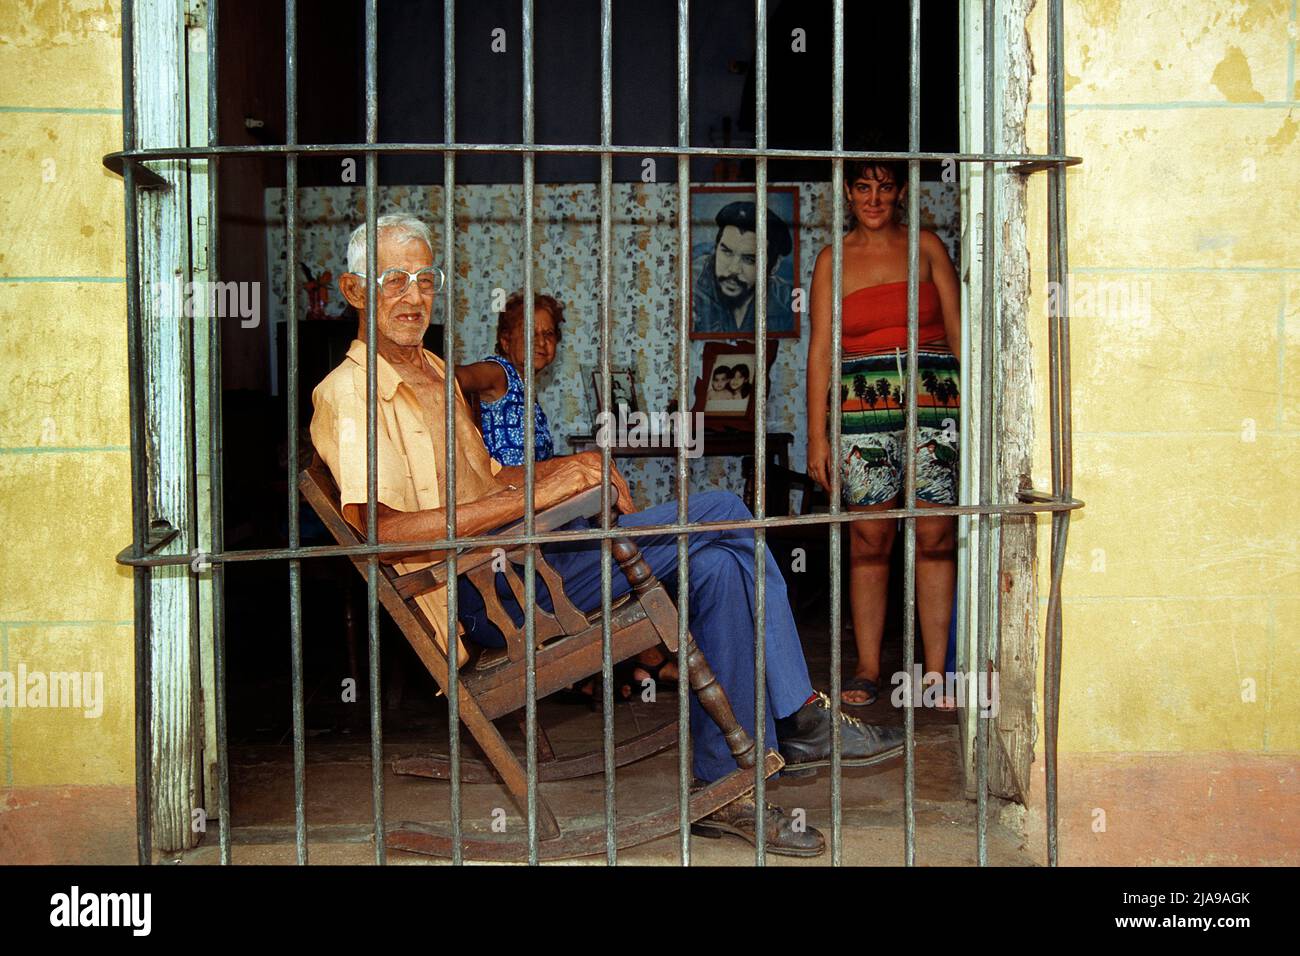 Old man in a rocking chair behind a barred window, old town of Trinidad, Unesco World Heritage Site, Cuba, Caribbean Stock Photo